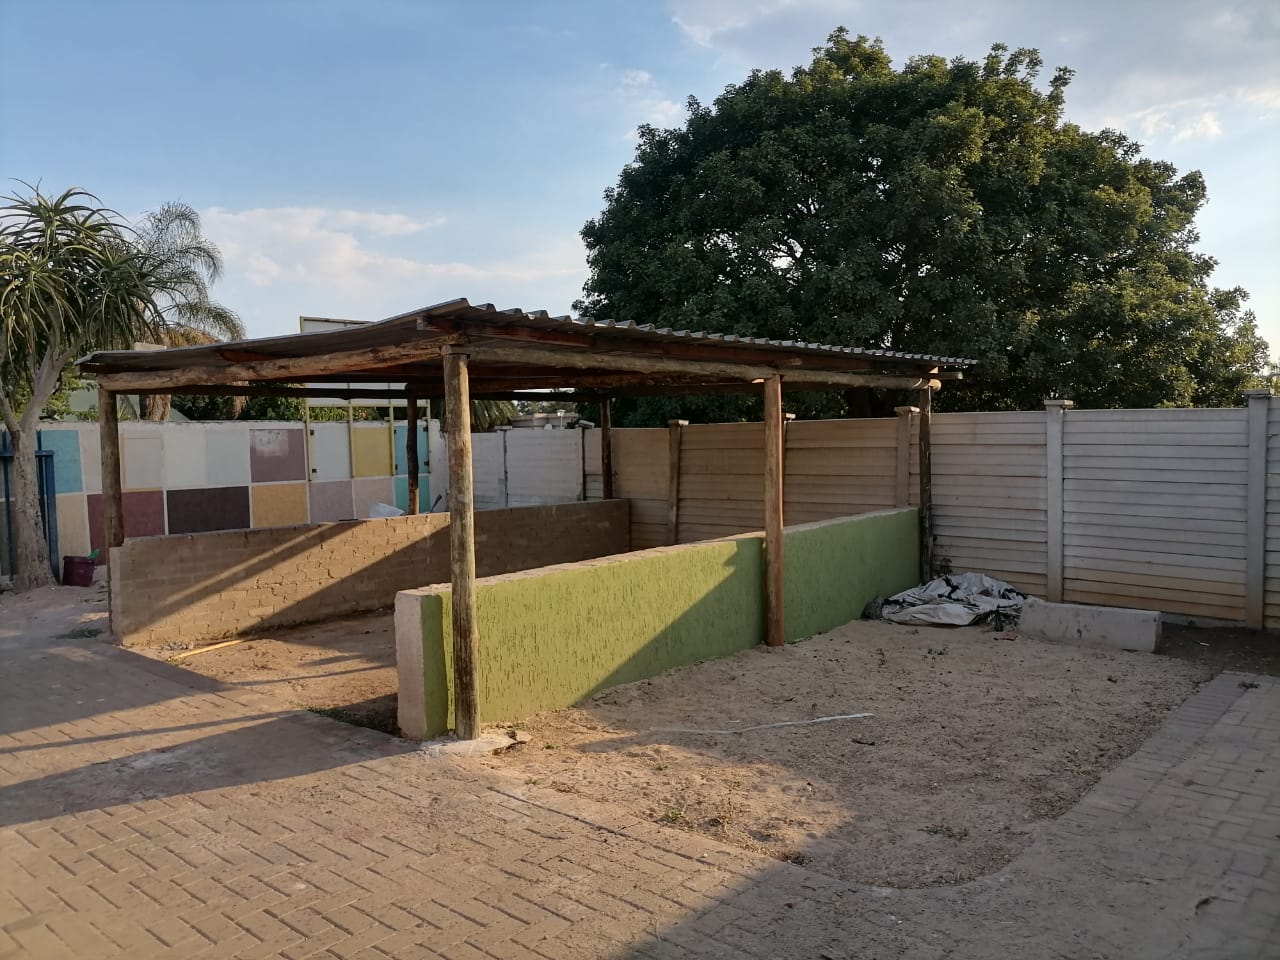 1 Bedroom Property for Sale in Annadale Limpopo